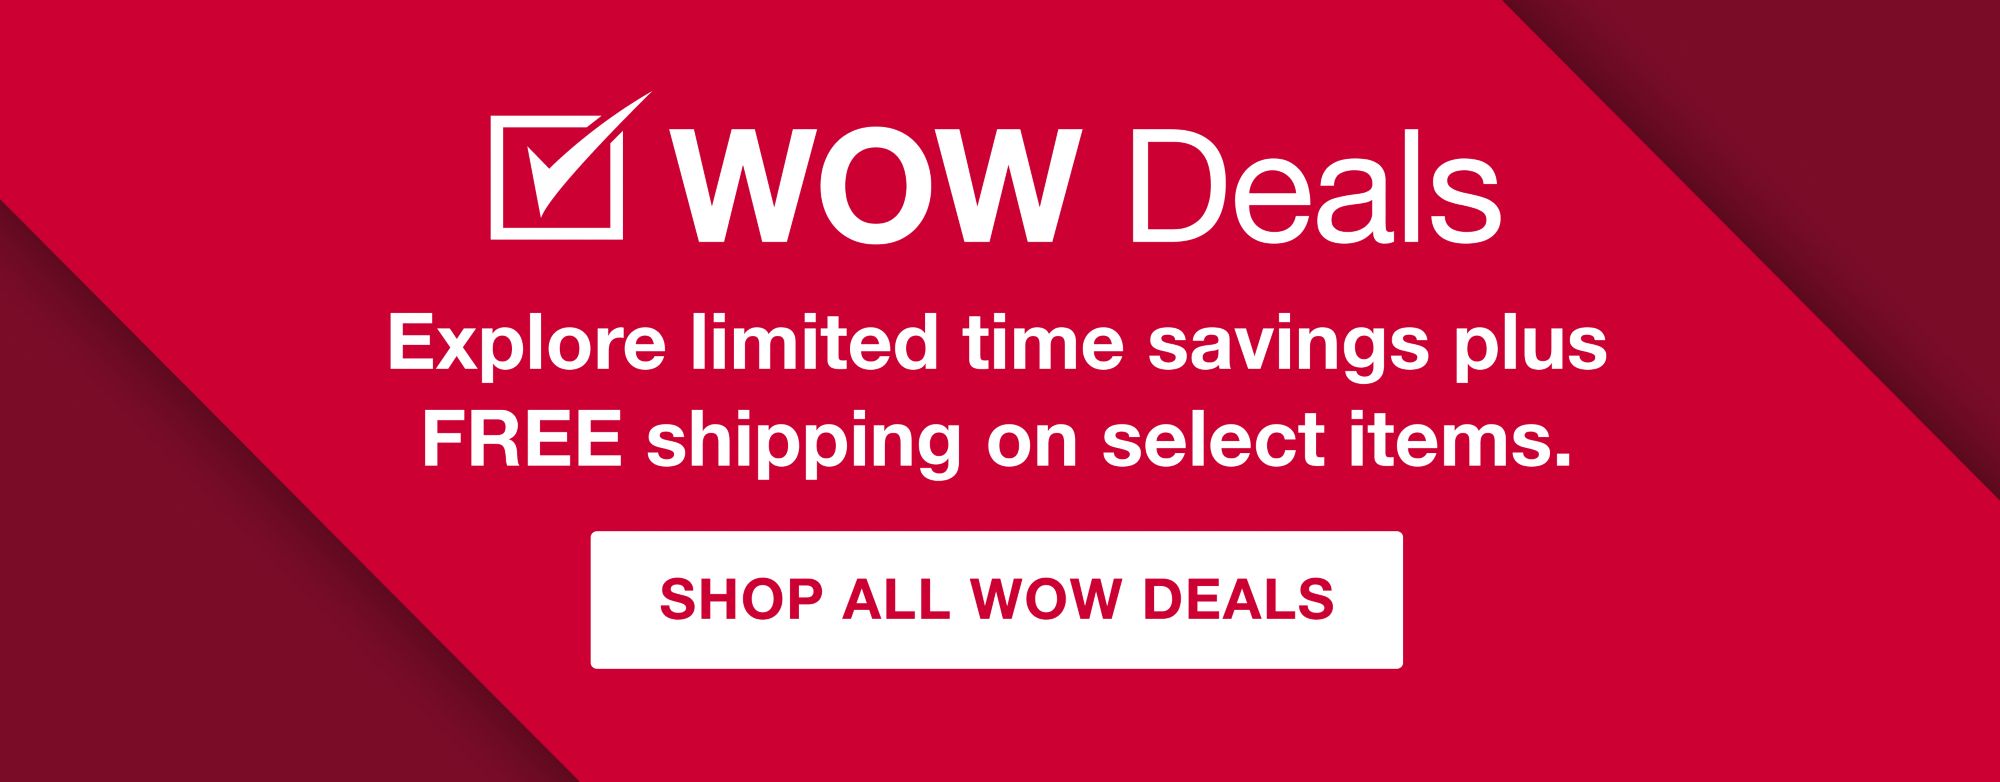 Explore limited time savings plus free shipping on select items.